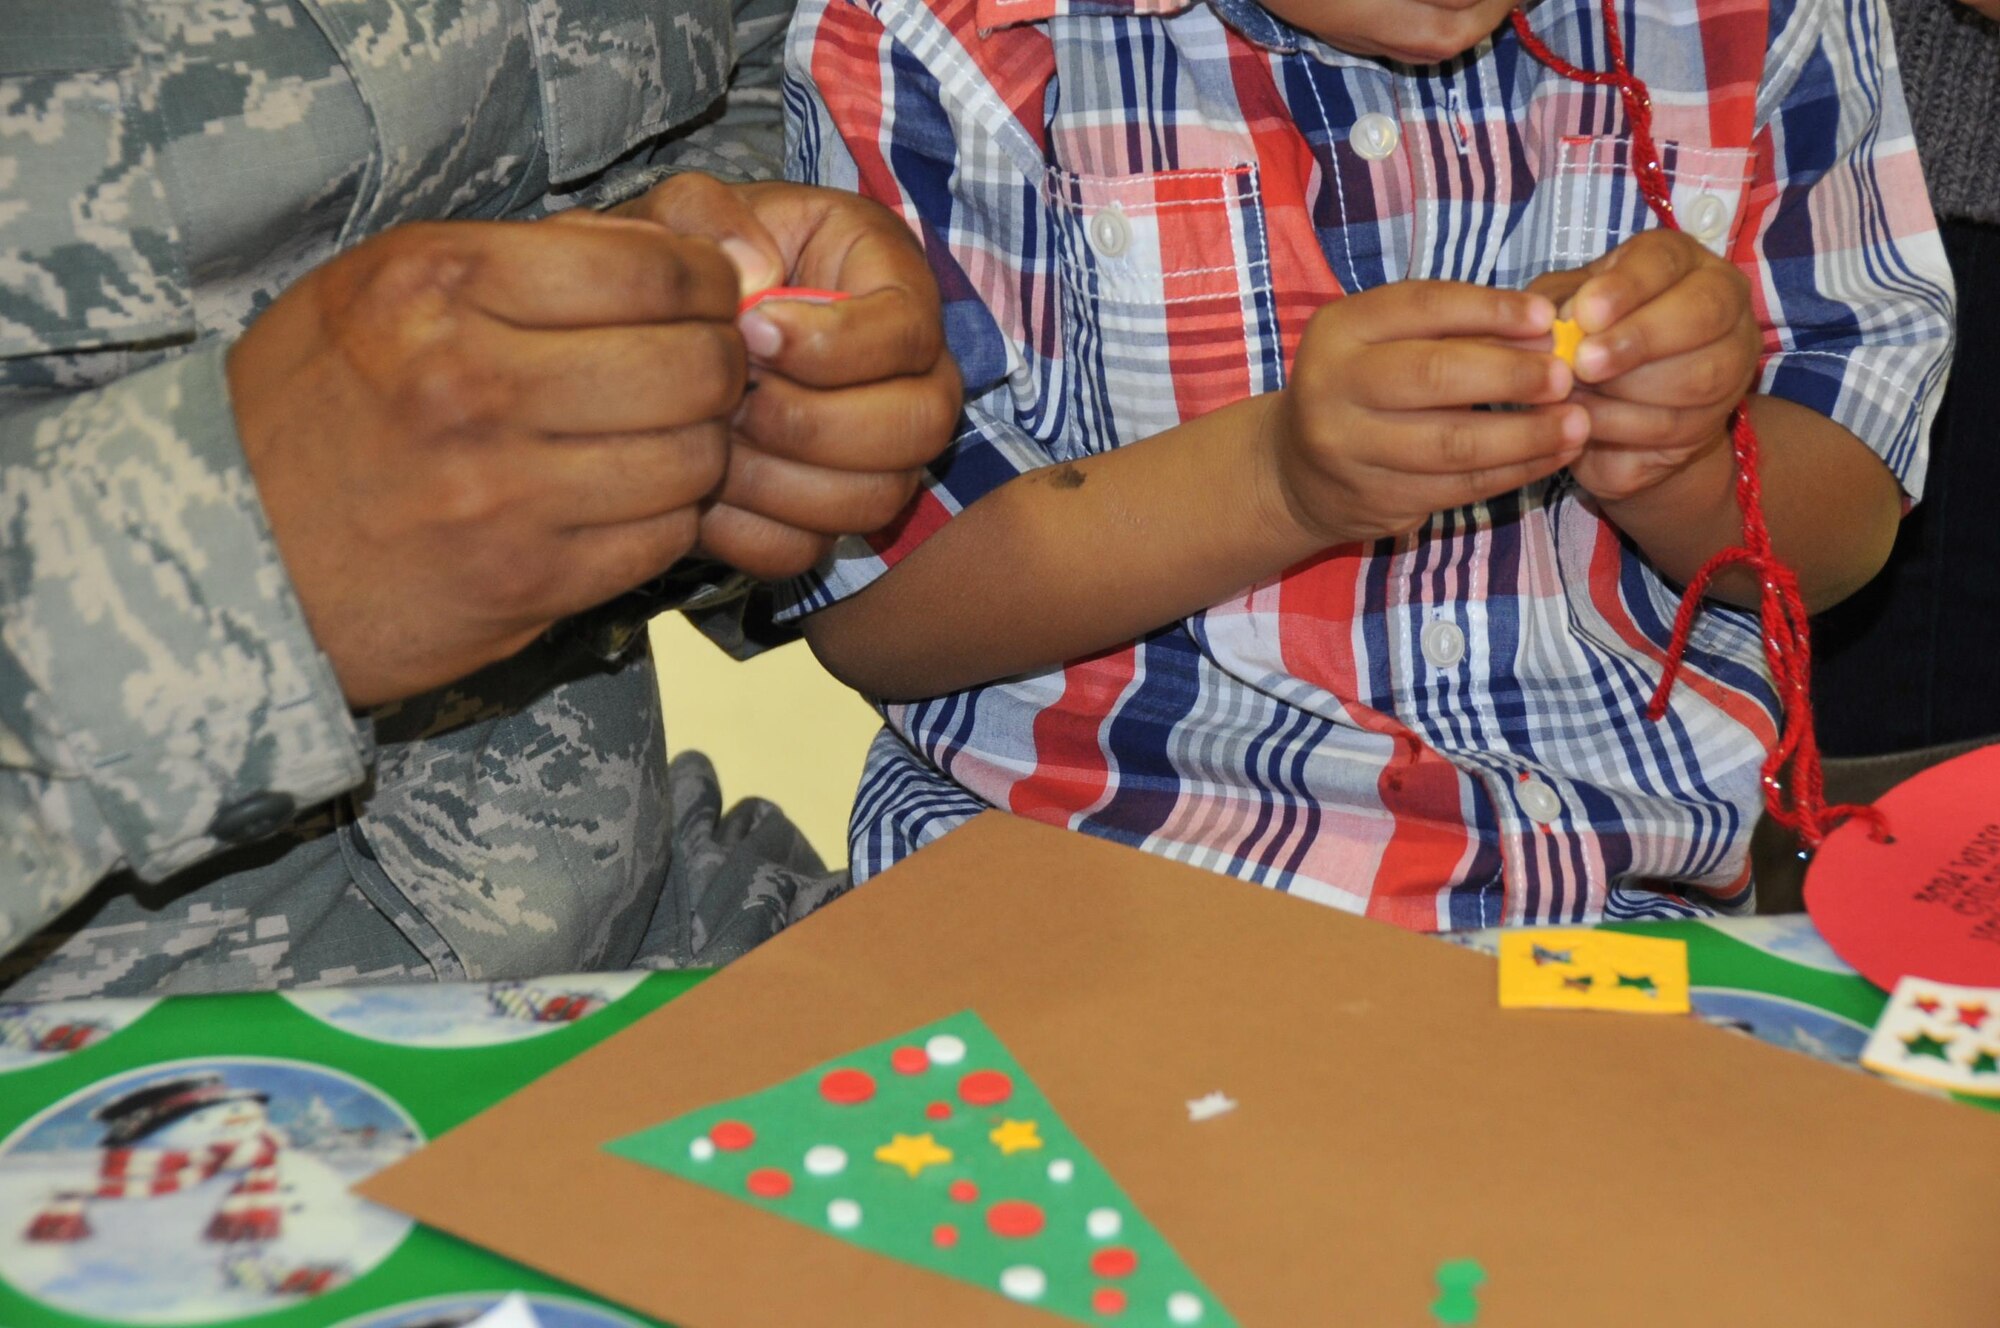 Staff Sgt. William Pierce, 403rd Maintenace Squadron fuel cell specialist, and his son Mason work together to create a Christmas card.  Members of the 403rd Wing and their families visit with Santa during the 403rd Wing children's holiday party Dec. 3, 2016.  (U.S. Air Force photo/Master Sgt. Jessica Kendziorek)